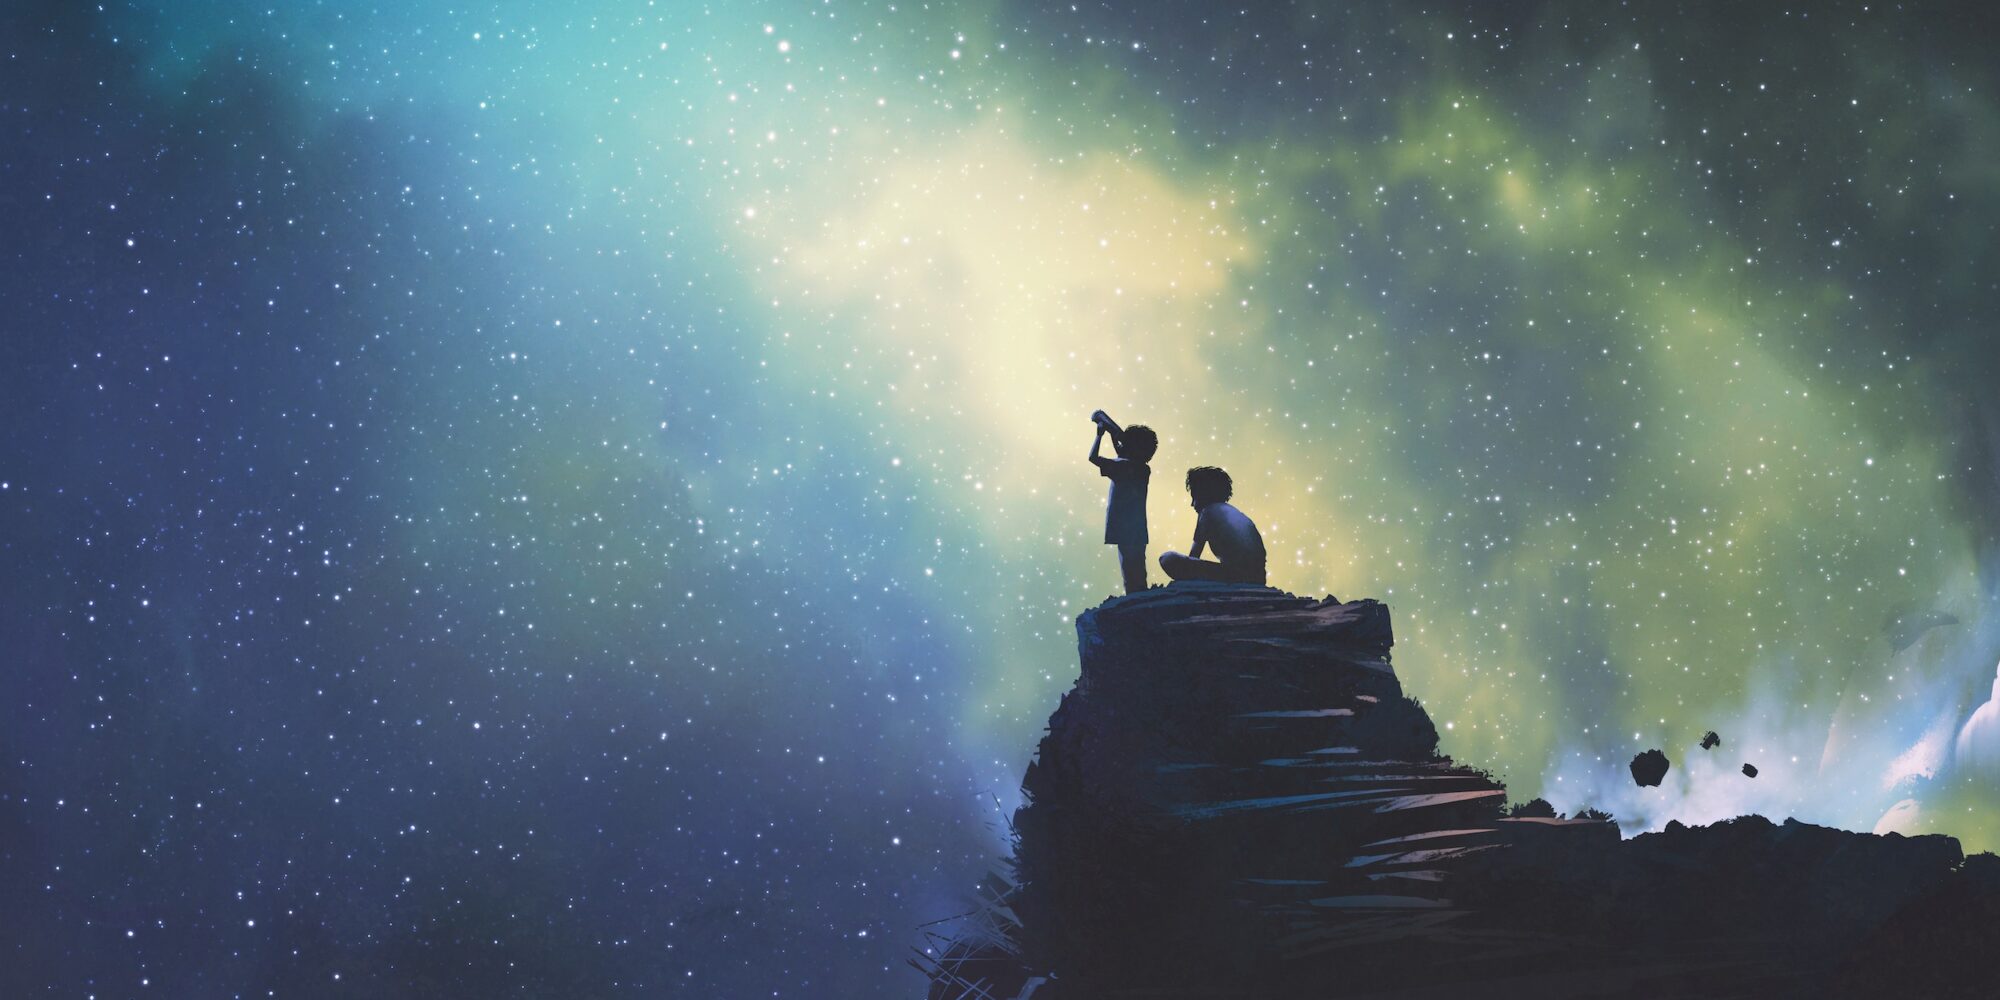 night scene of two brothers outdoors, llittle boy looking through a telescope at stars in the sky, digital art style, illustration painting